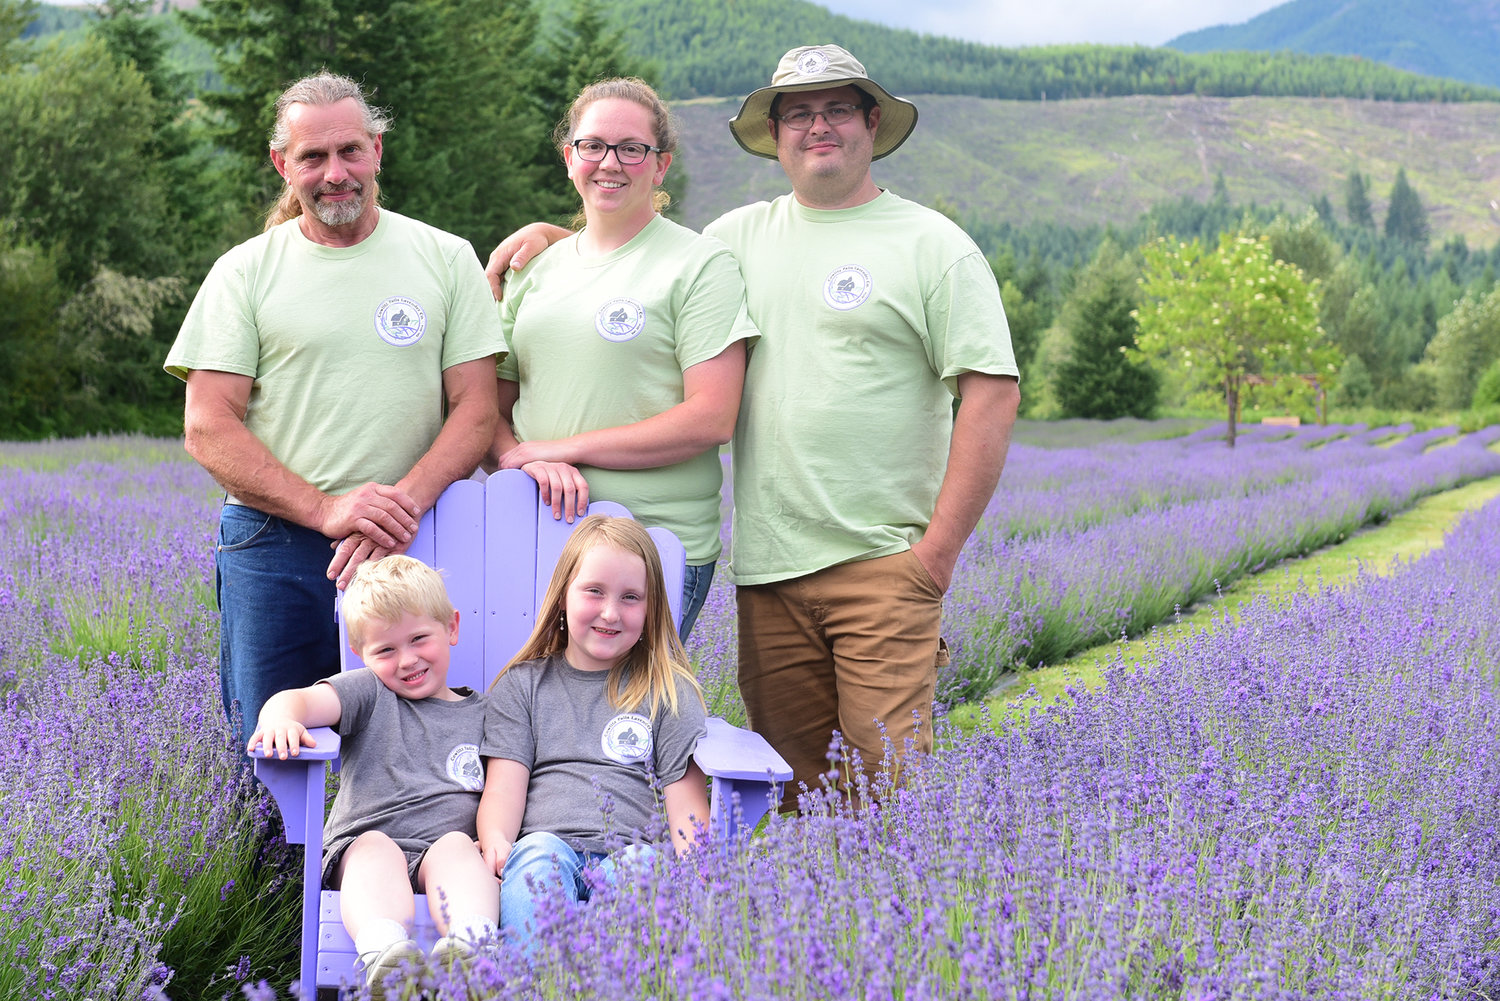 From top left: Tim, Jordann and Justin Claibourn own and operate the Cowlitz Falls Lavender Company in Randle. Jordann and Justin’s children Mason and Deven are seated in front.